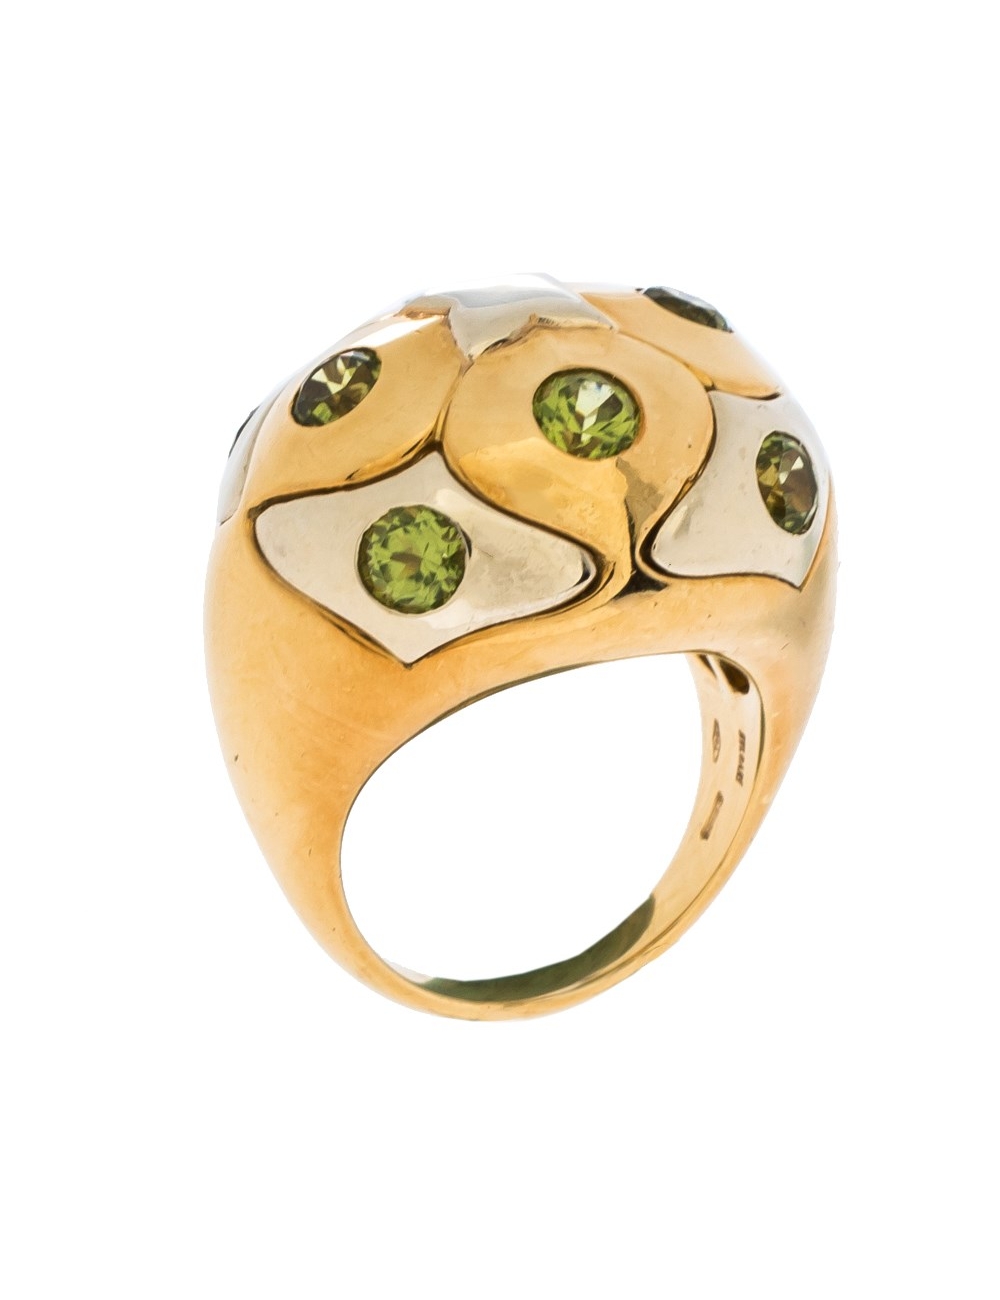 It is definitely love at first sight with this Bvlgari cocktail ring. Beautifully crafted from 18k y